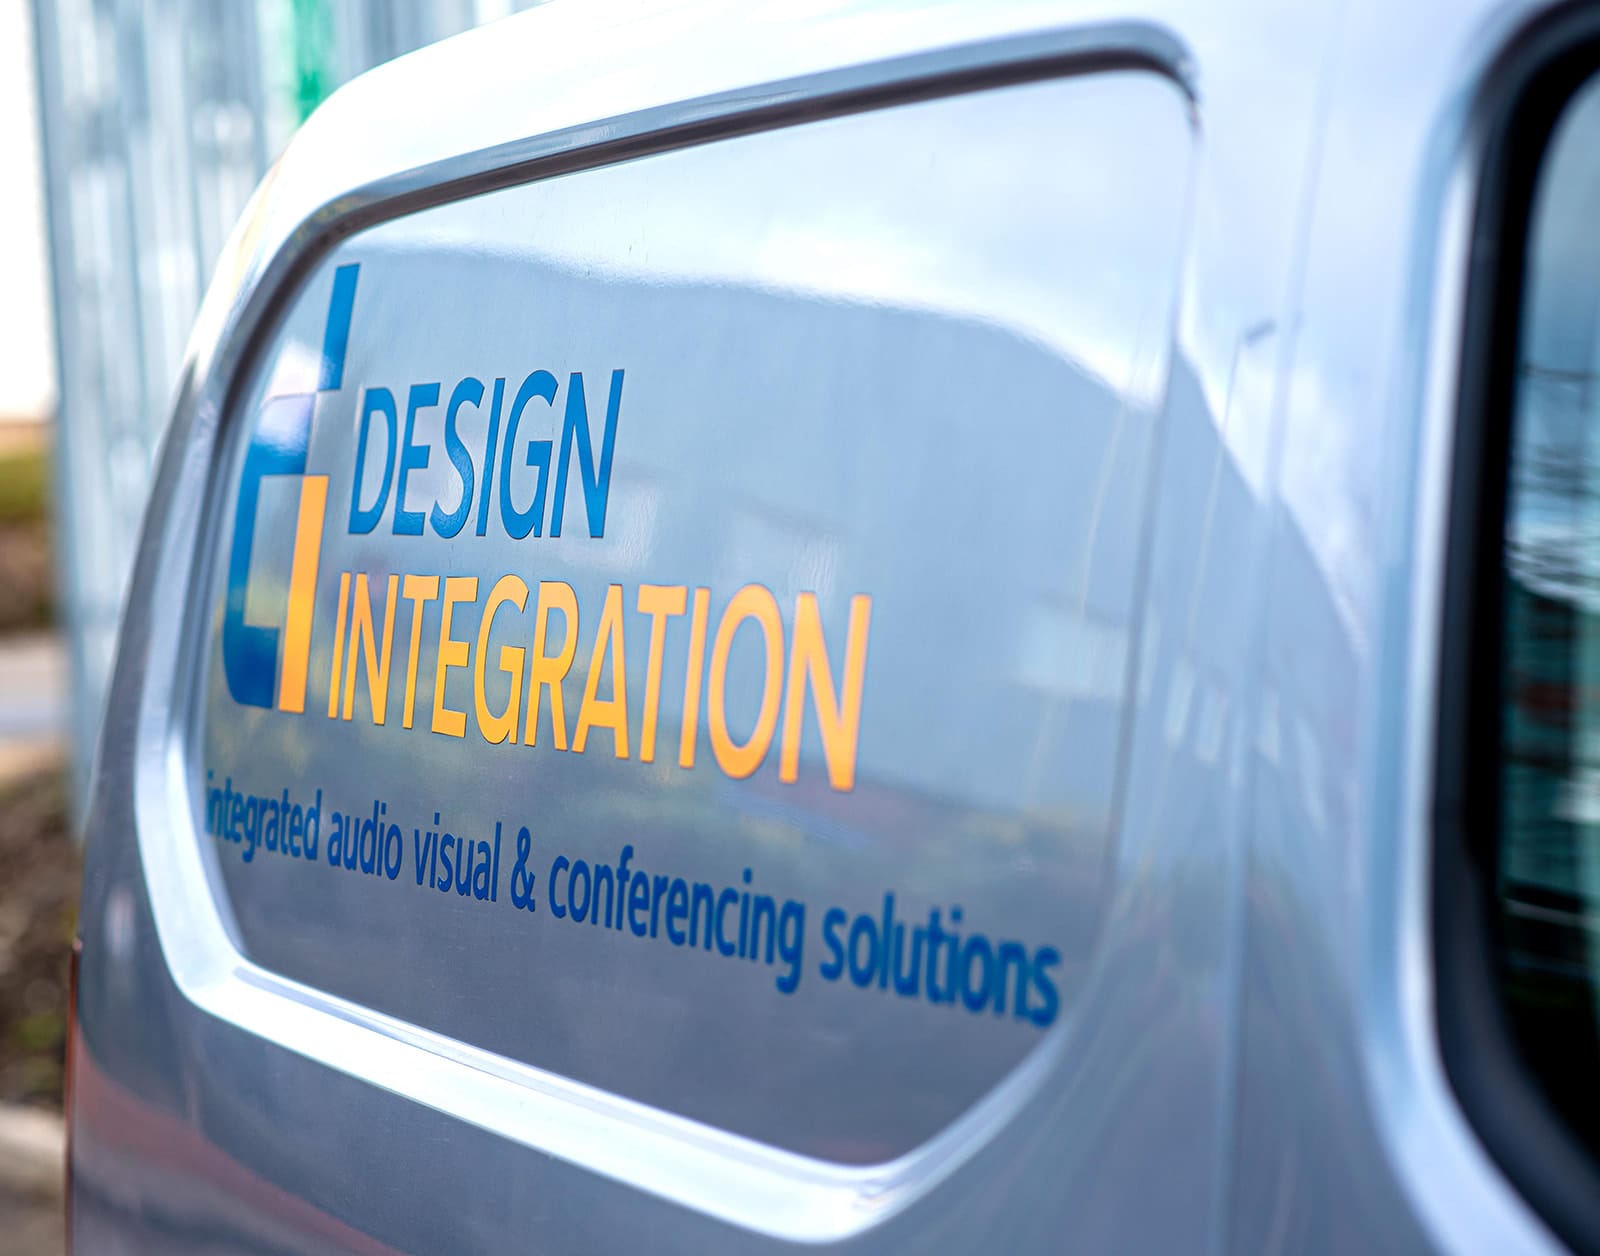 Design Integration branded vans with integrated audio visual and conferencing solutions